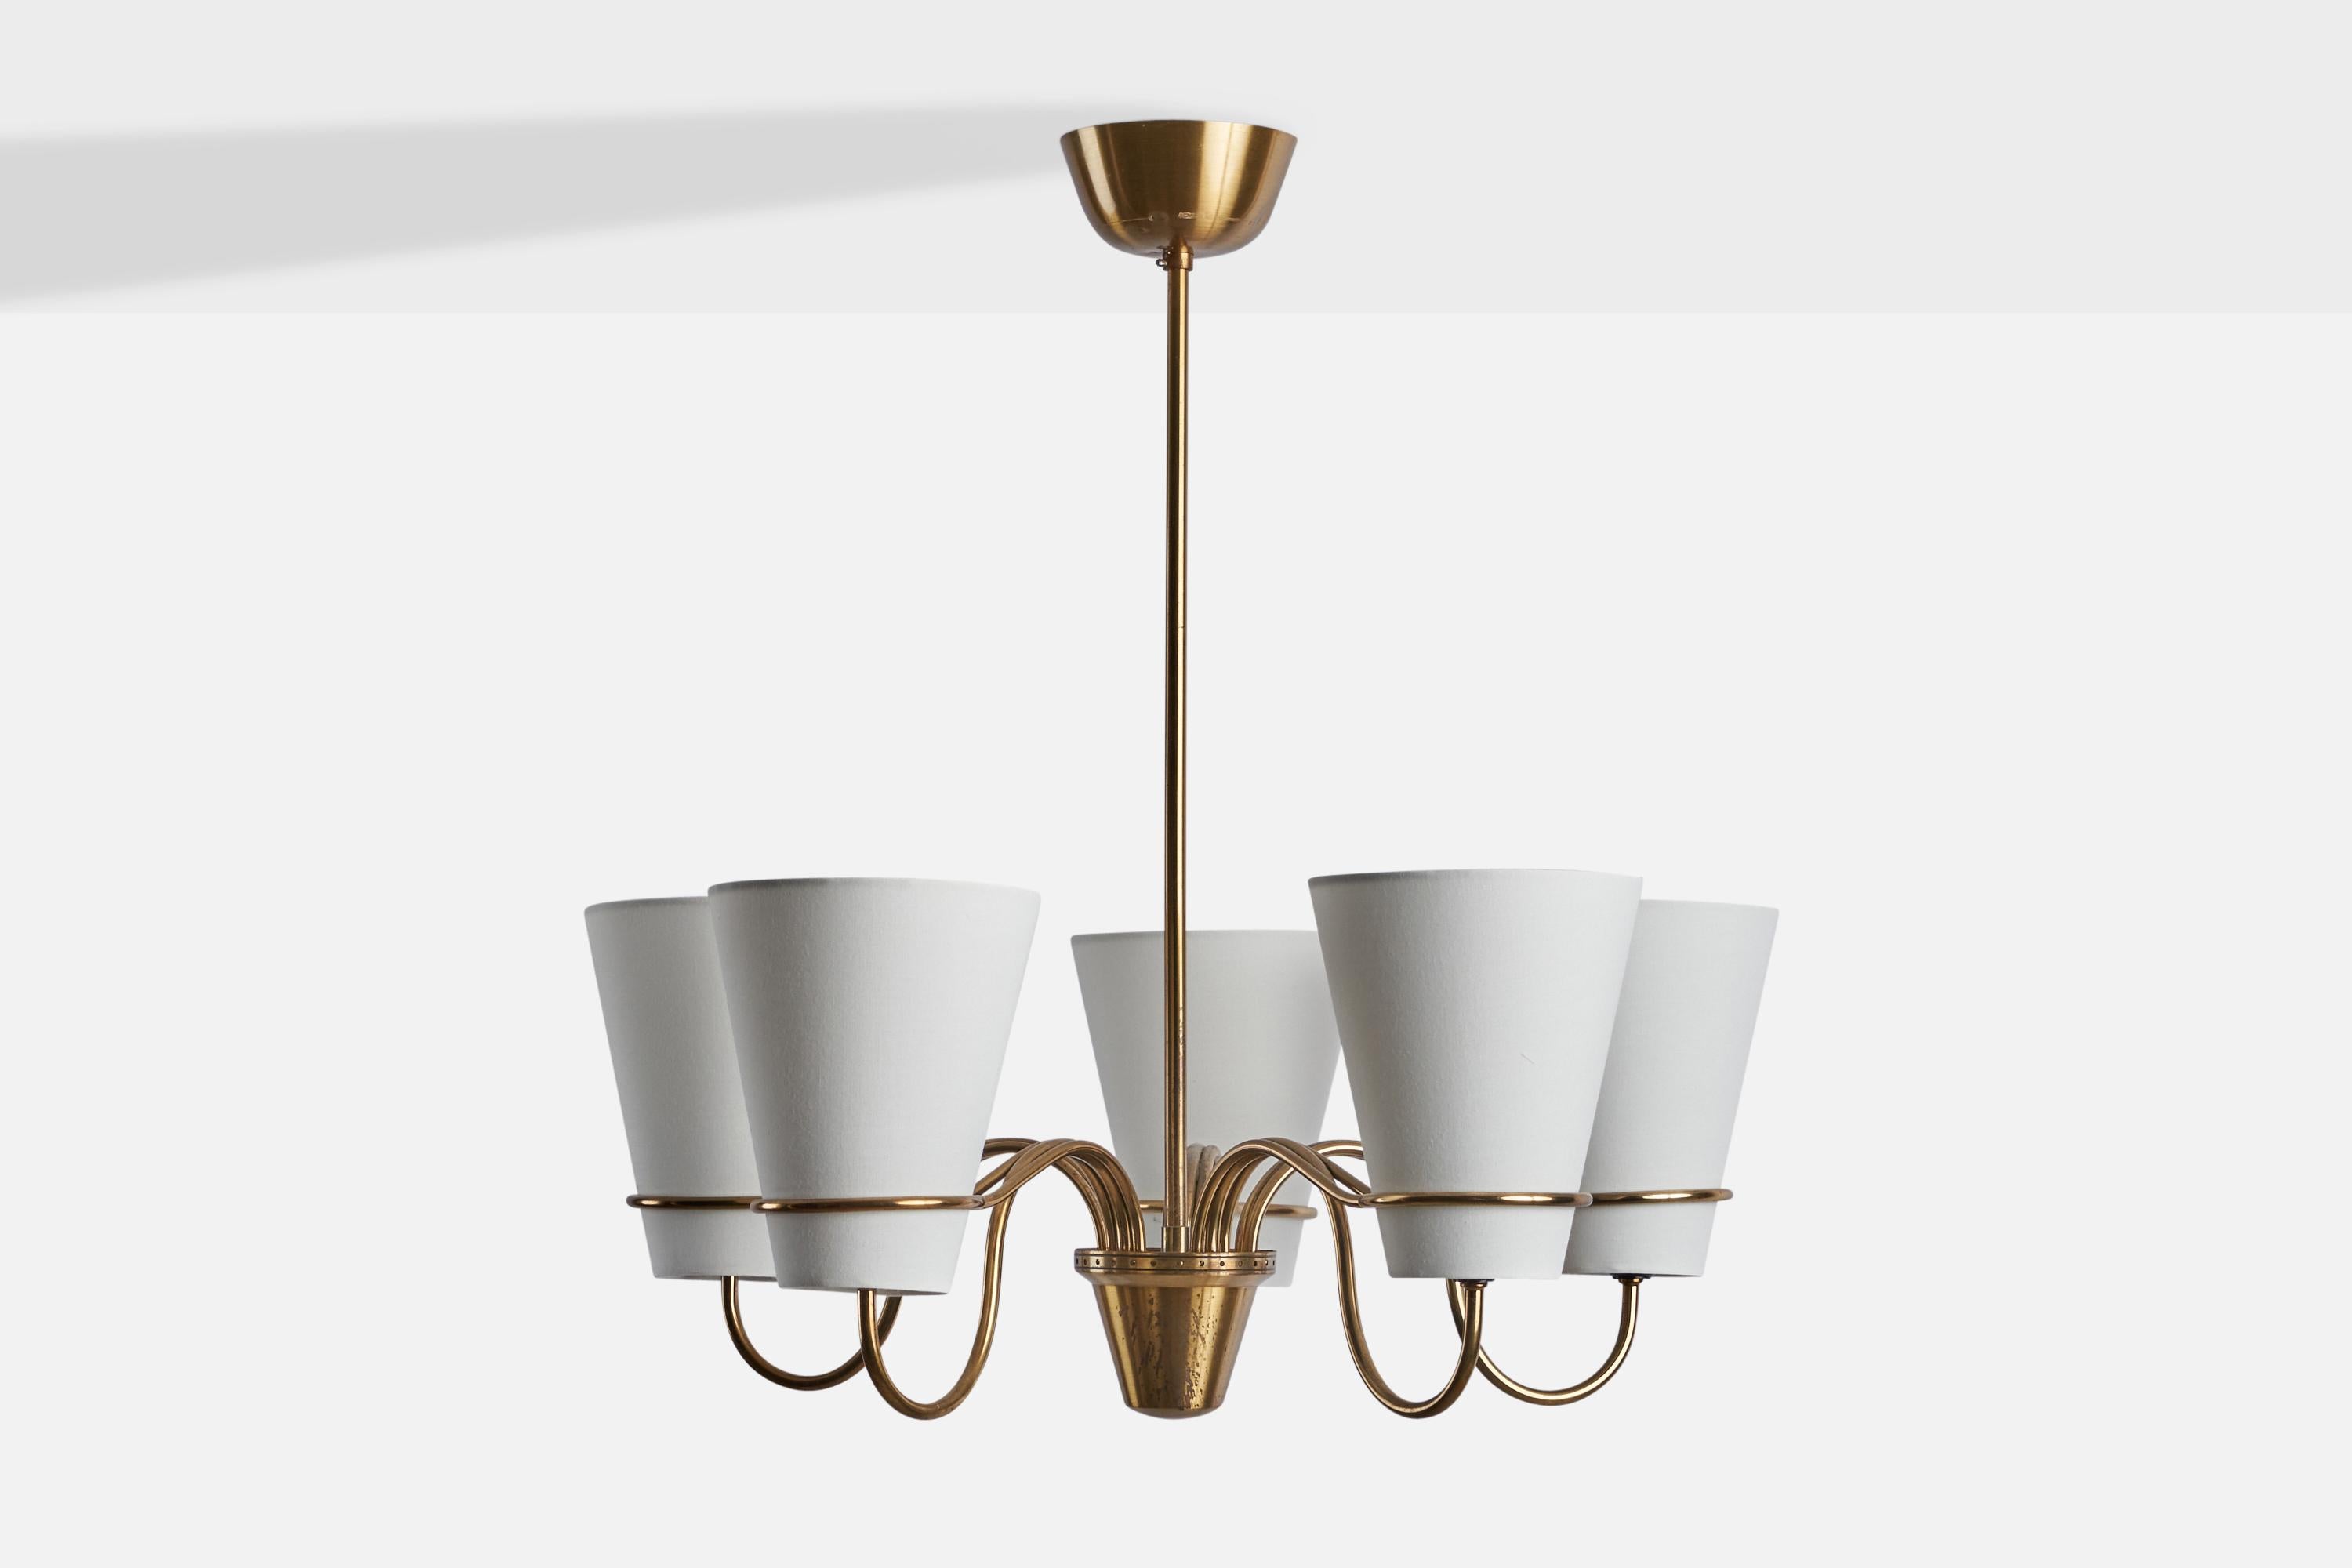 A brass and white fabric chandelier designed and produced in Sweden, 1940s.

Overall Dimensions (inches): 35.25” H x 18” Diameter
Bulb Specifications: E-14 Bulb
Number of Sockets: 6
